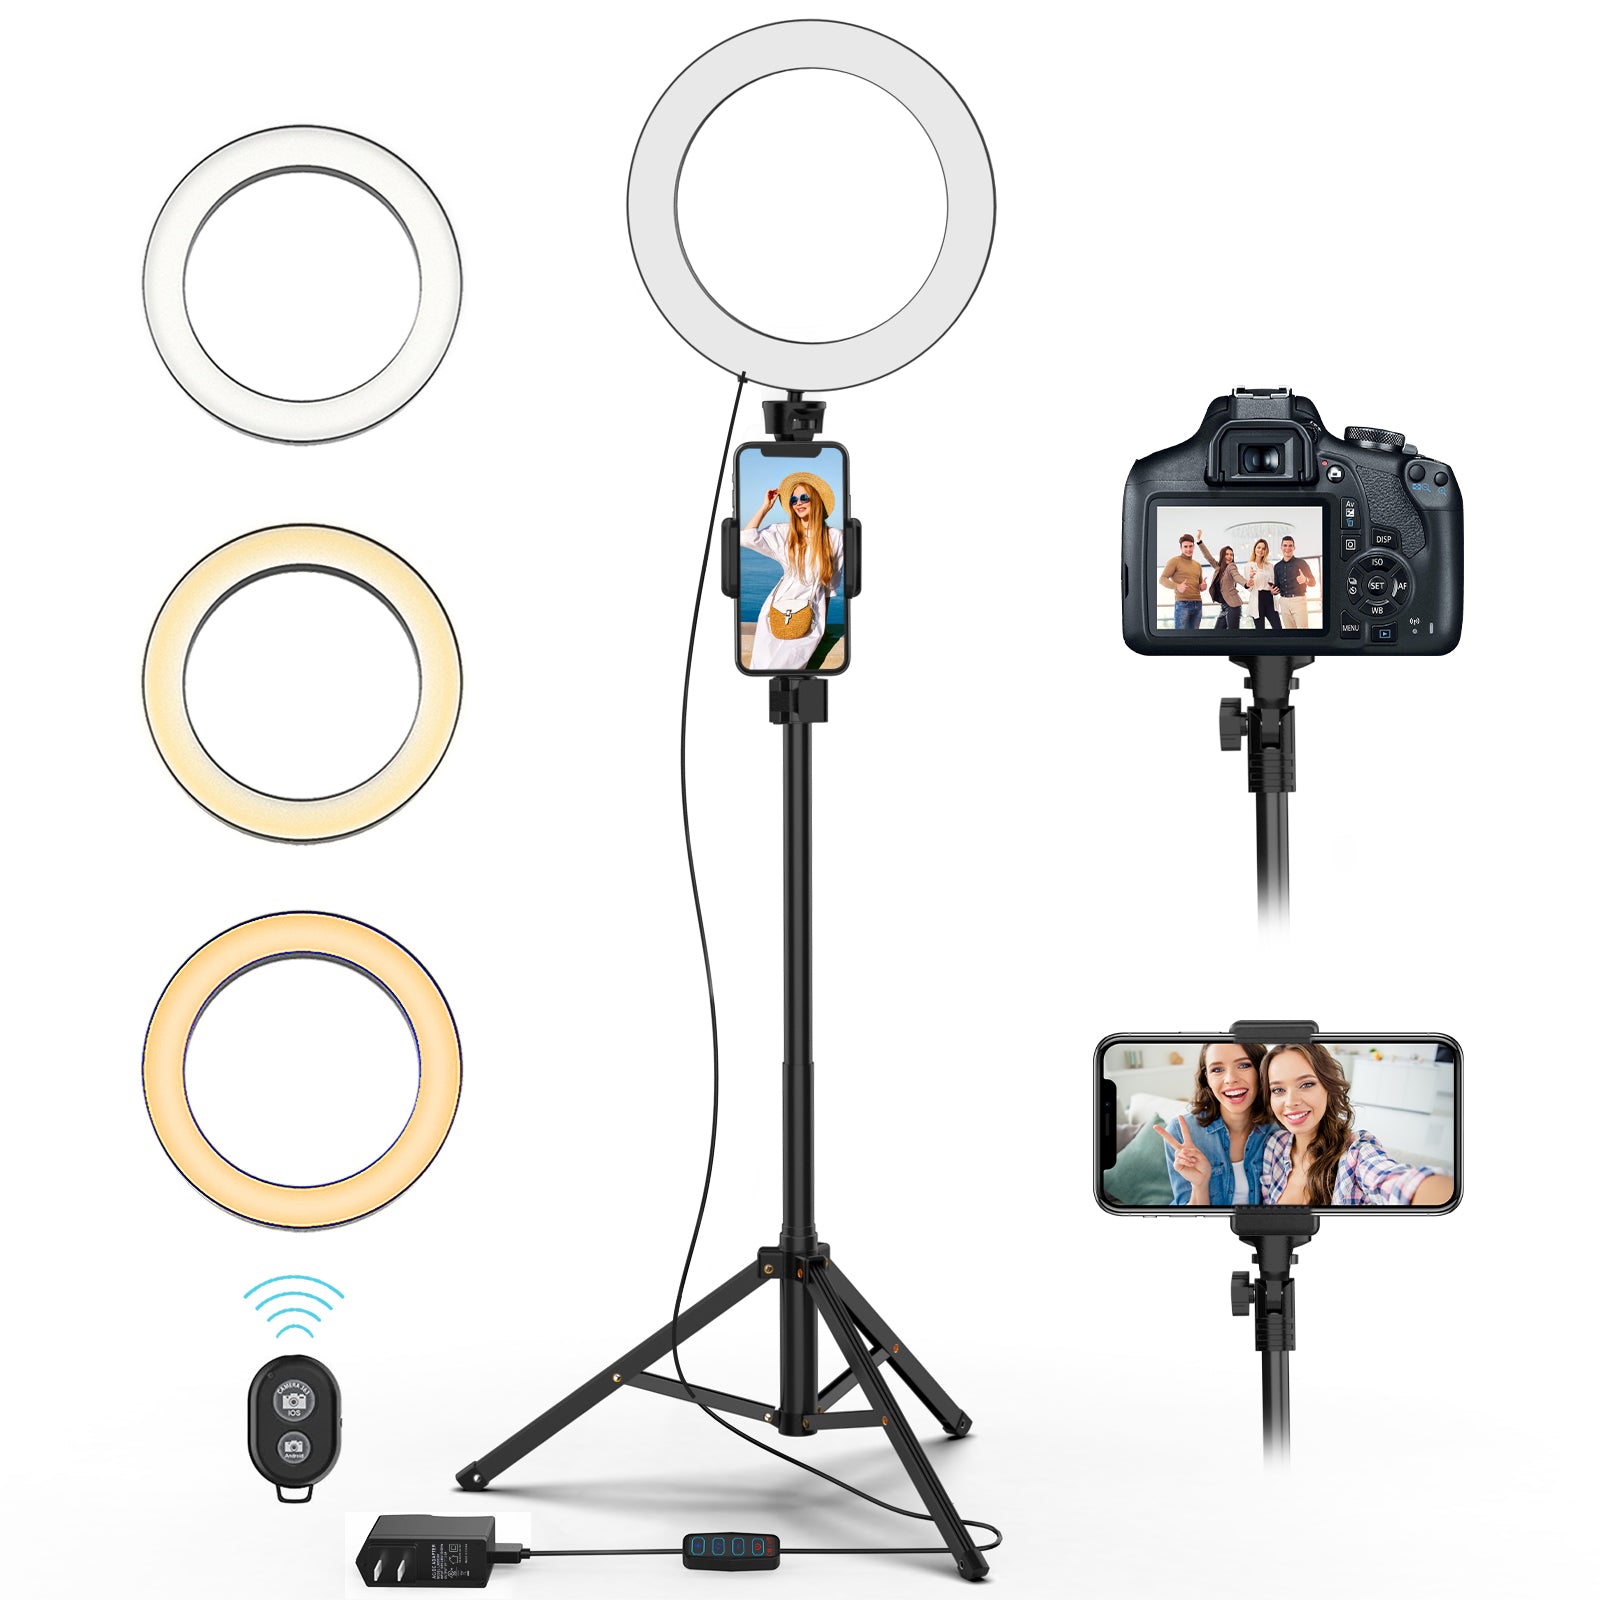 Ring Light With Mobile Holder 26cm for Live Streaming, Youtube Videos And  Makeup - Black - Sale price - Buy online in Pakistan - Farosh.pk